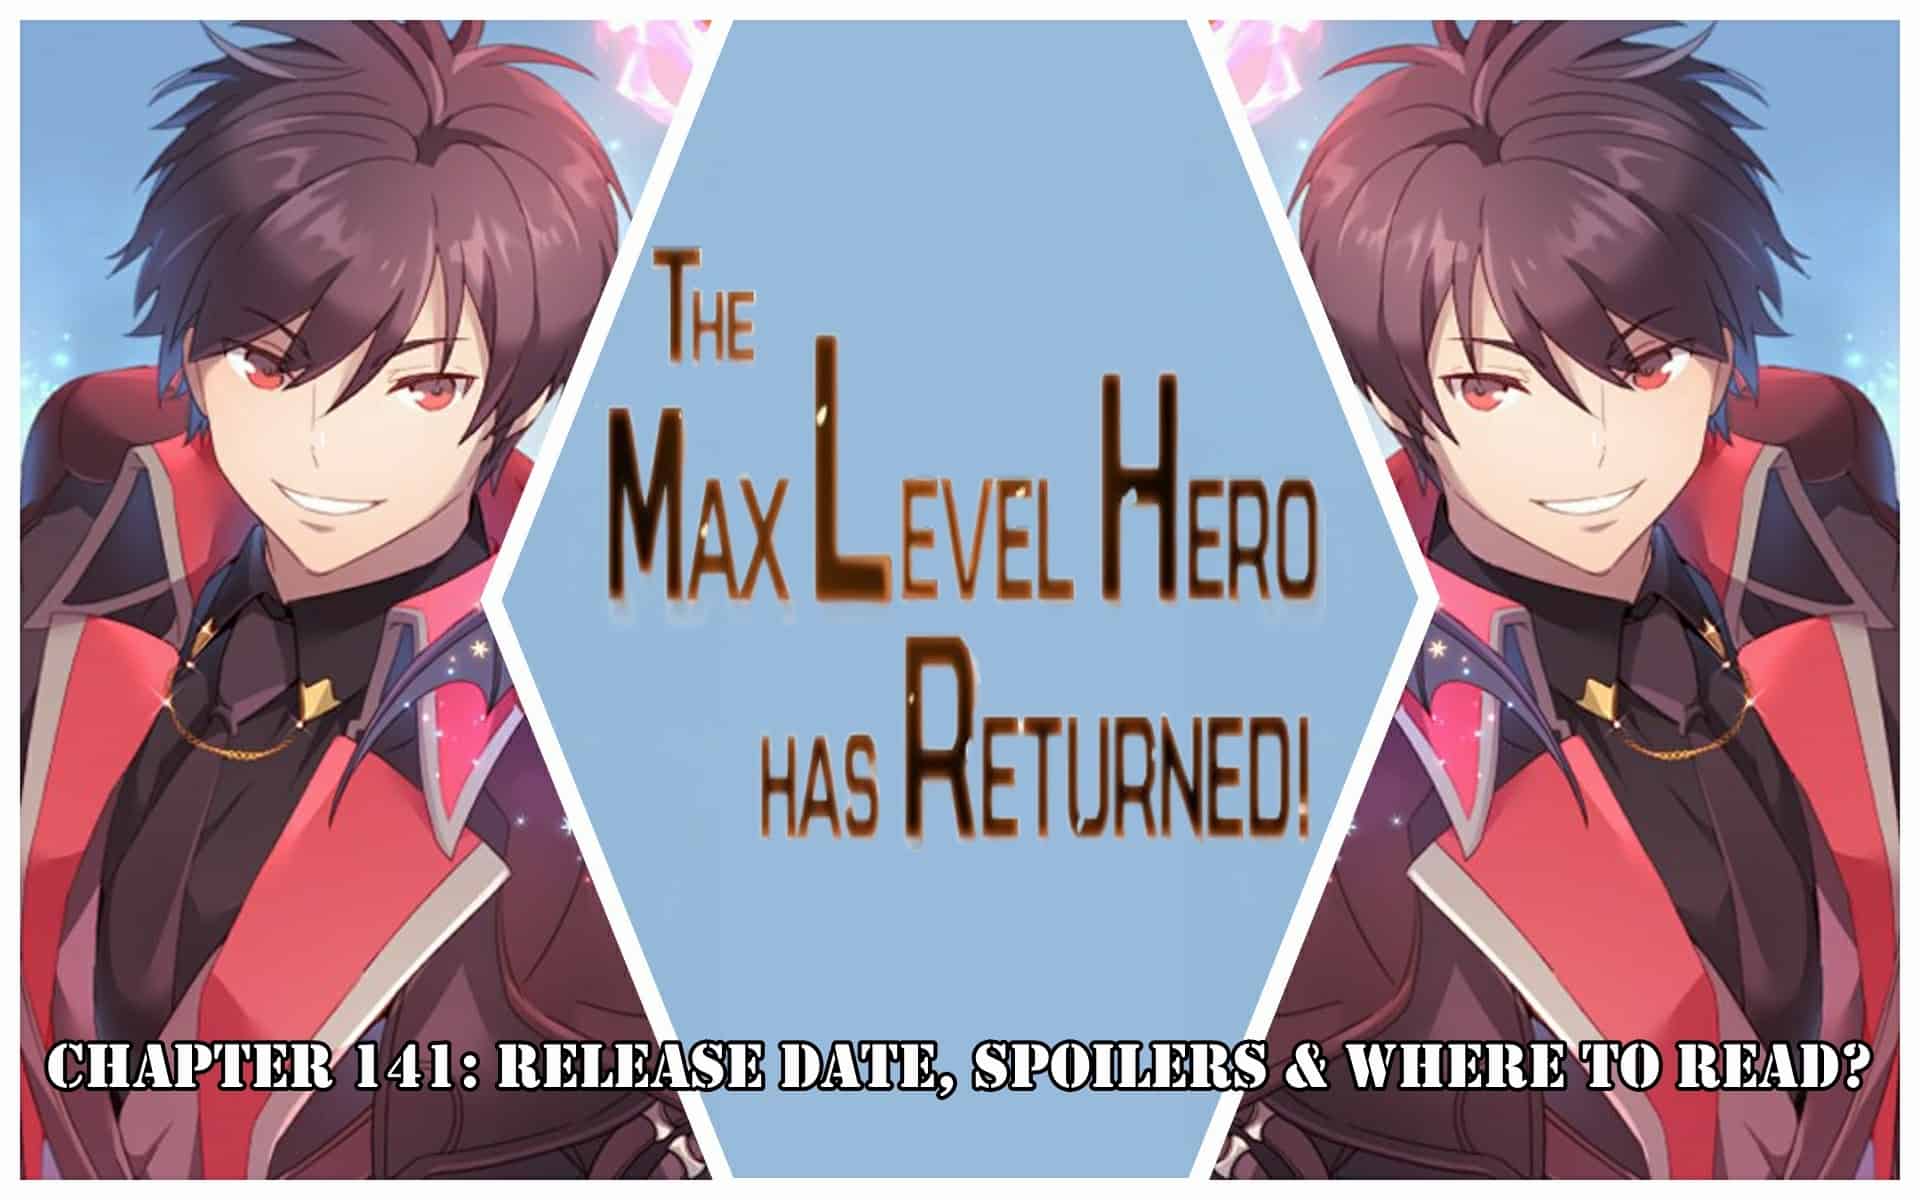 The Max Level Hero Has Returned! Chapter 141: Release Date, Spoilers & Where to Read?